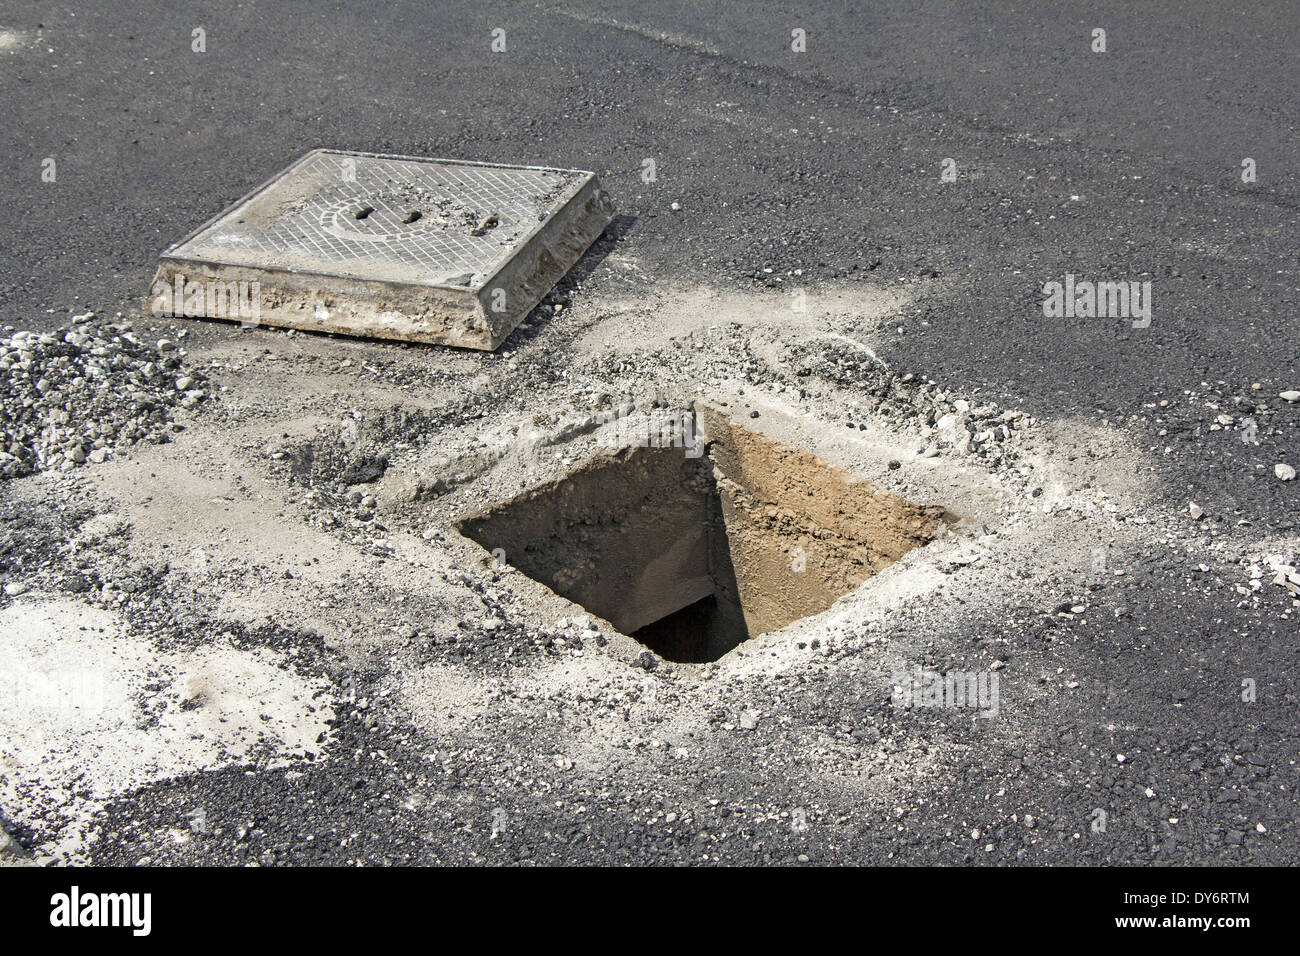 Open unsecured sewer manhole in the street Stock Photo